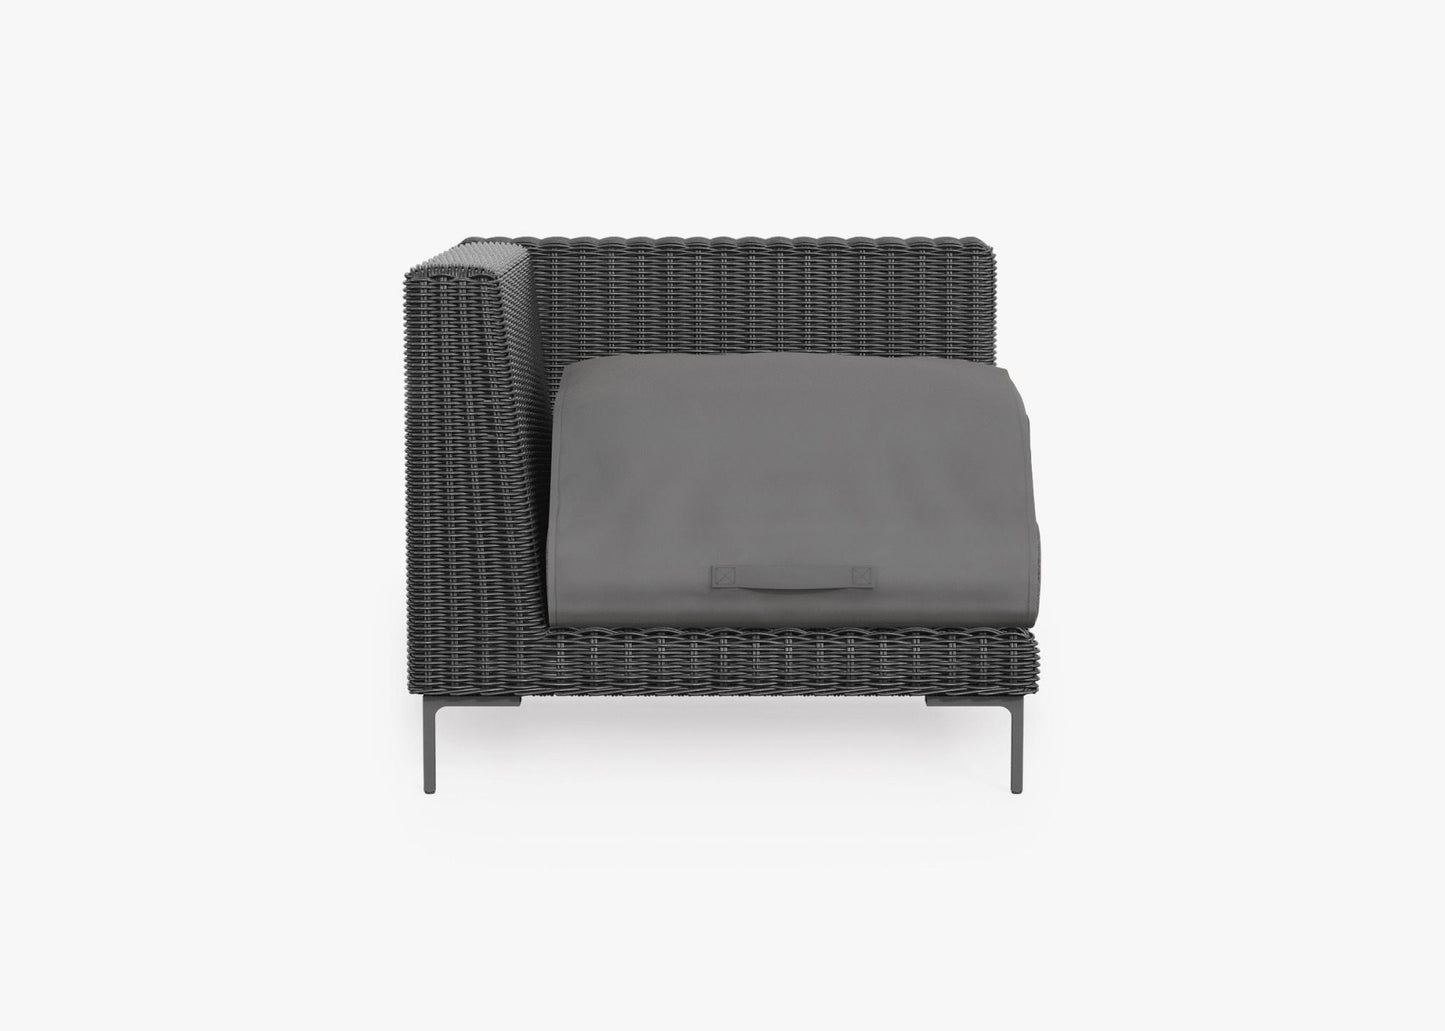 Live Outer 37" Black Wicker Outdoor Left/Right Corner Chair With Dark Pebble Gray Cushion